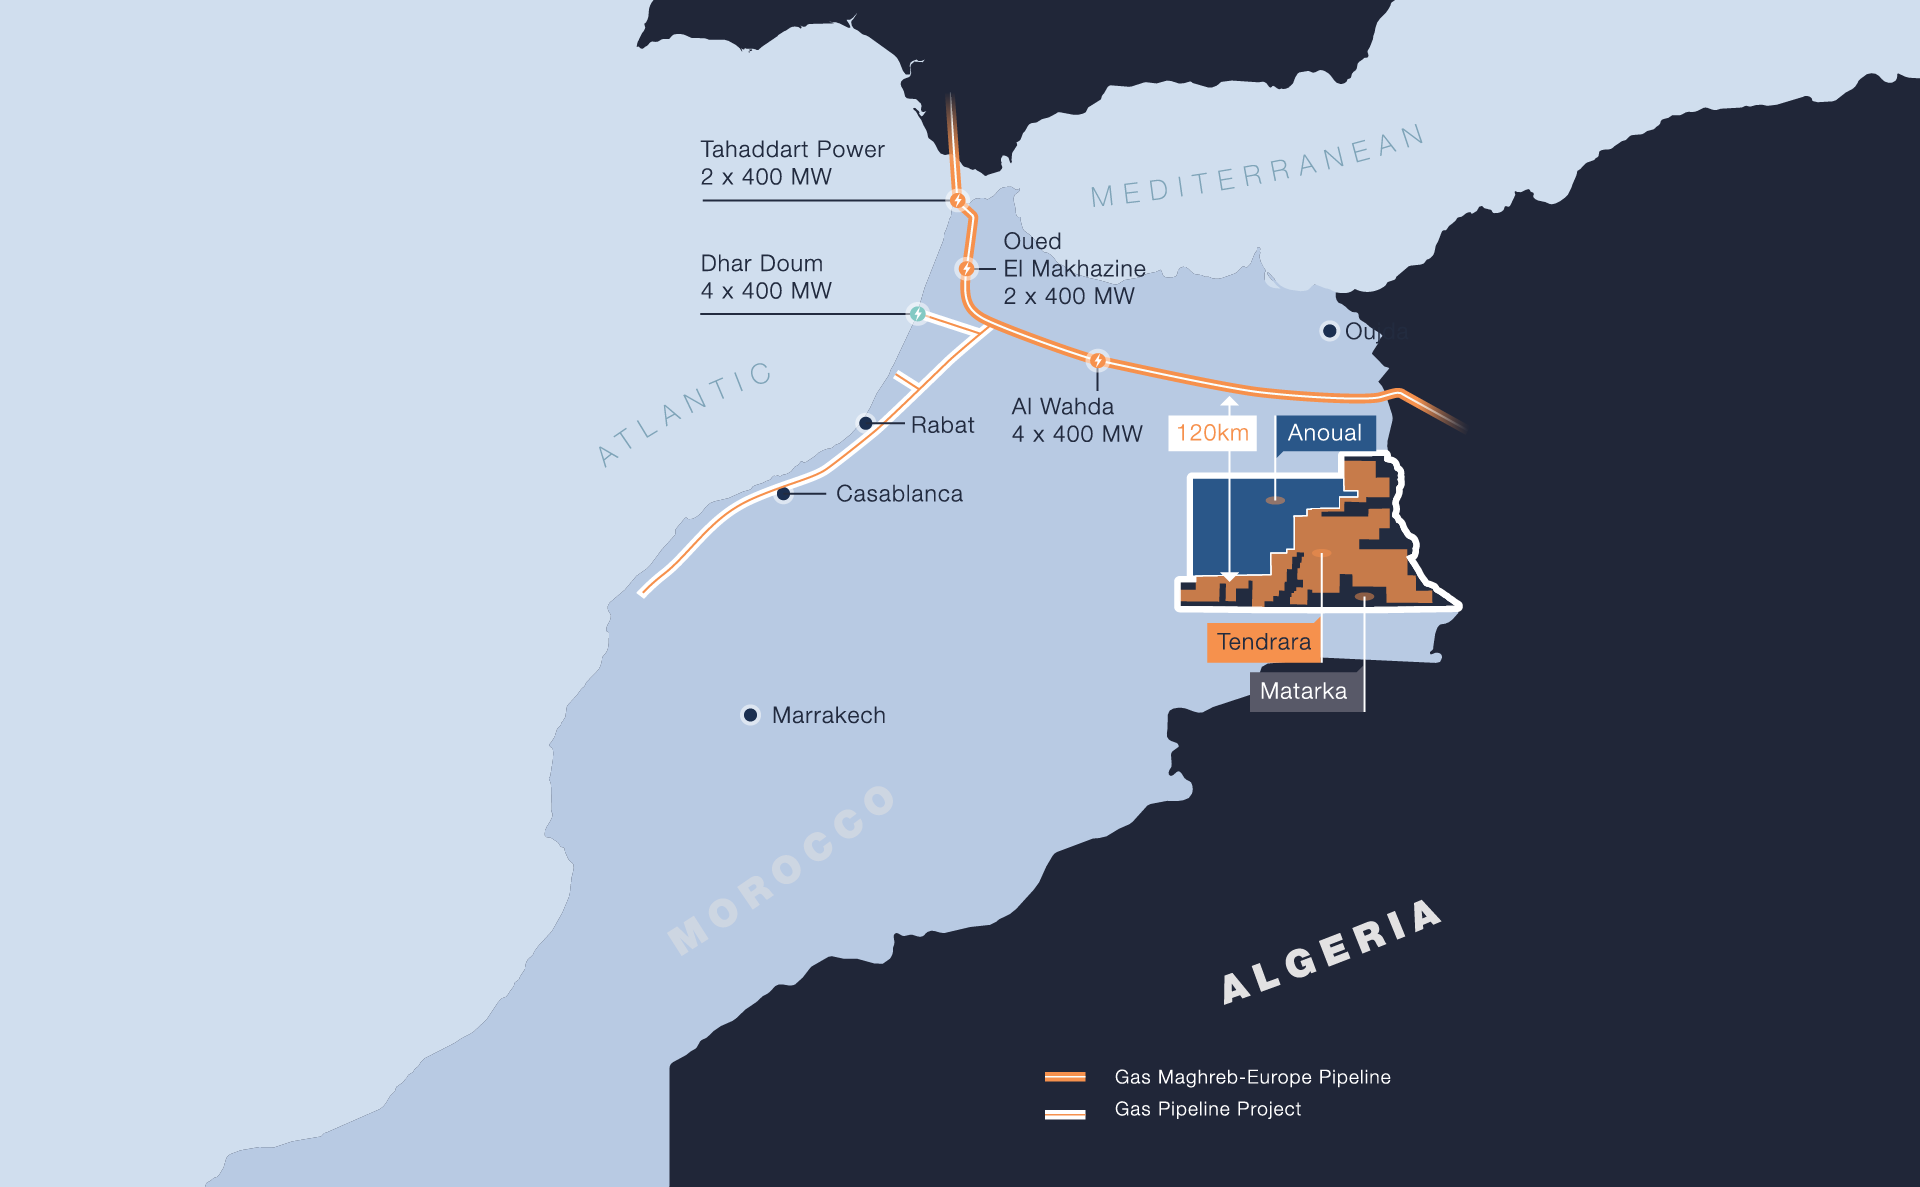 Sound Energy Plans Plant & Pipeline to Tap into Eastern Morocco Gas